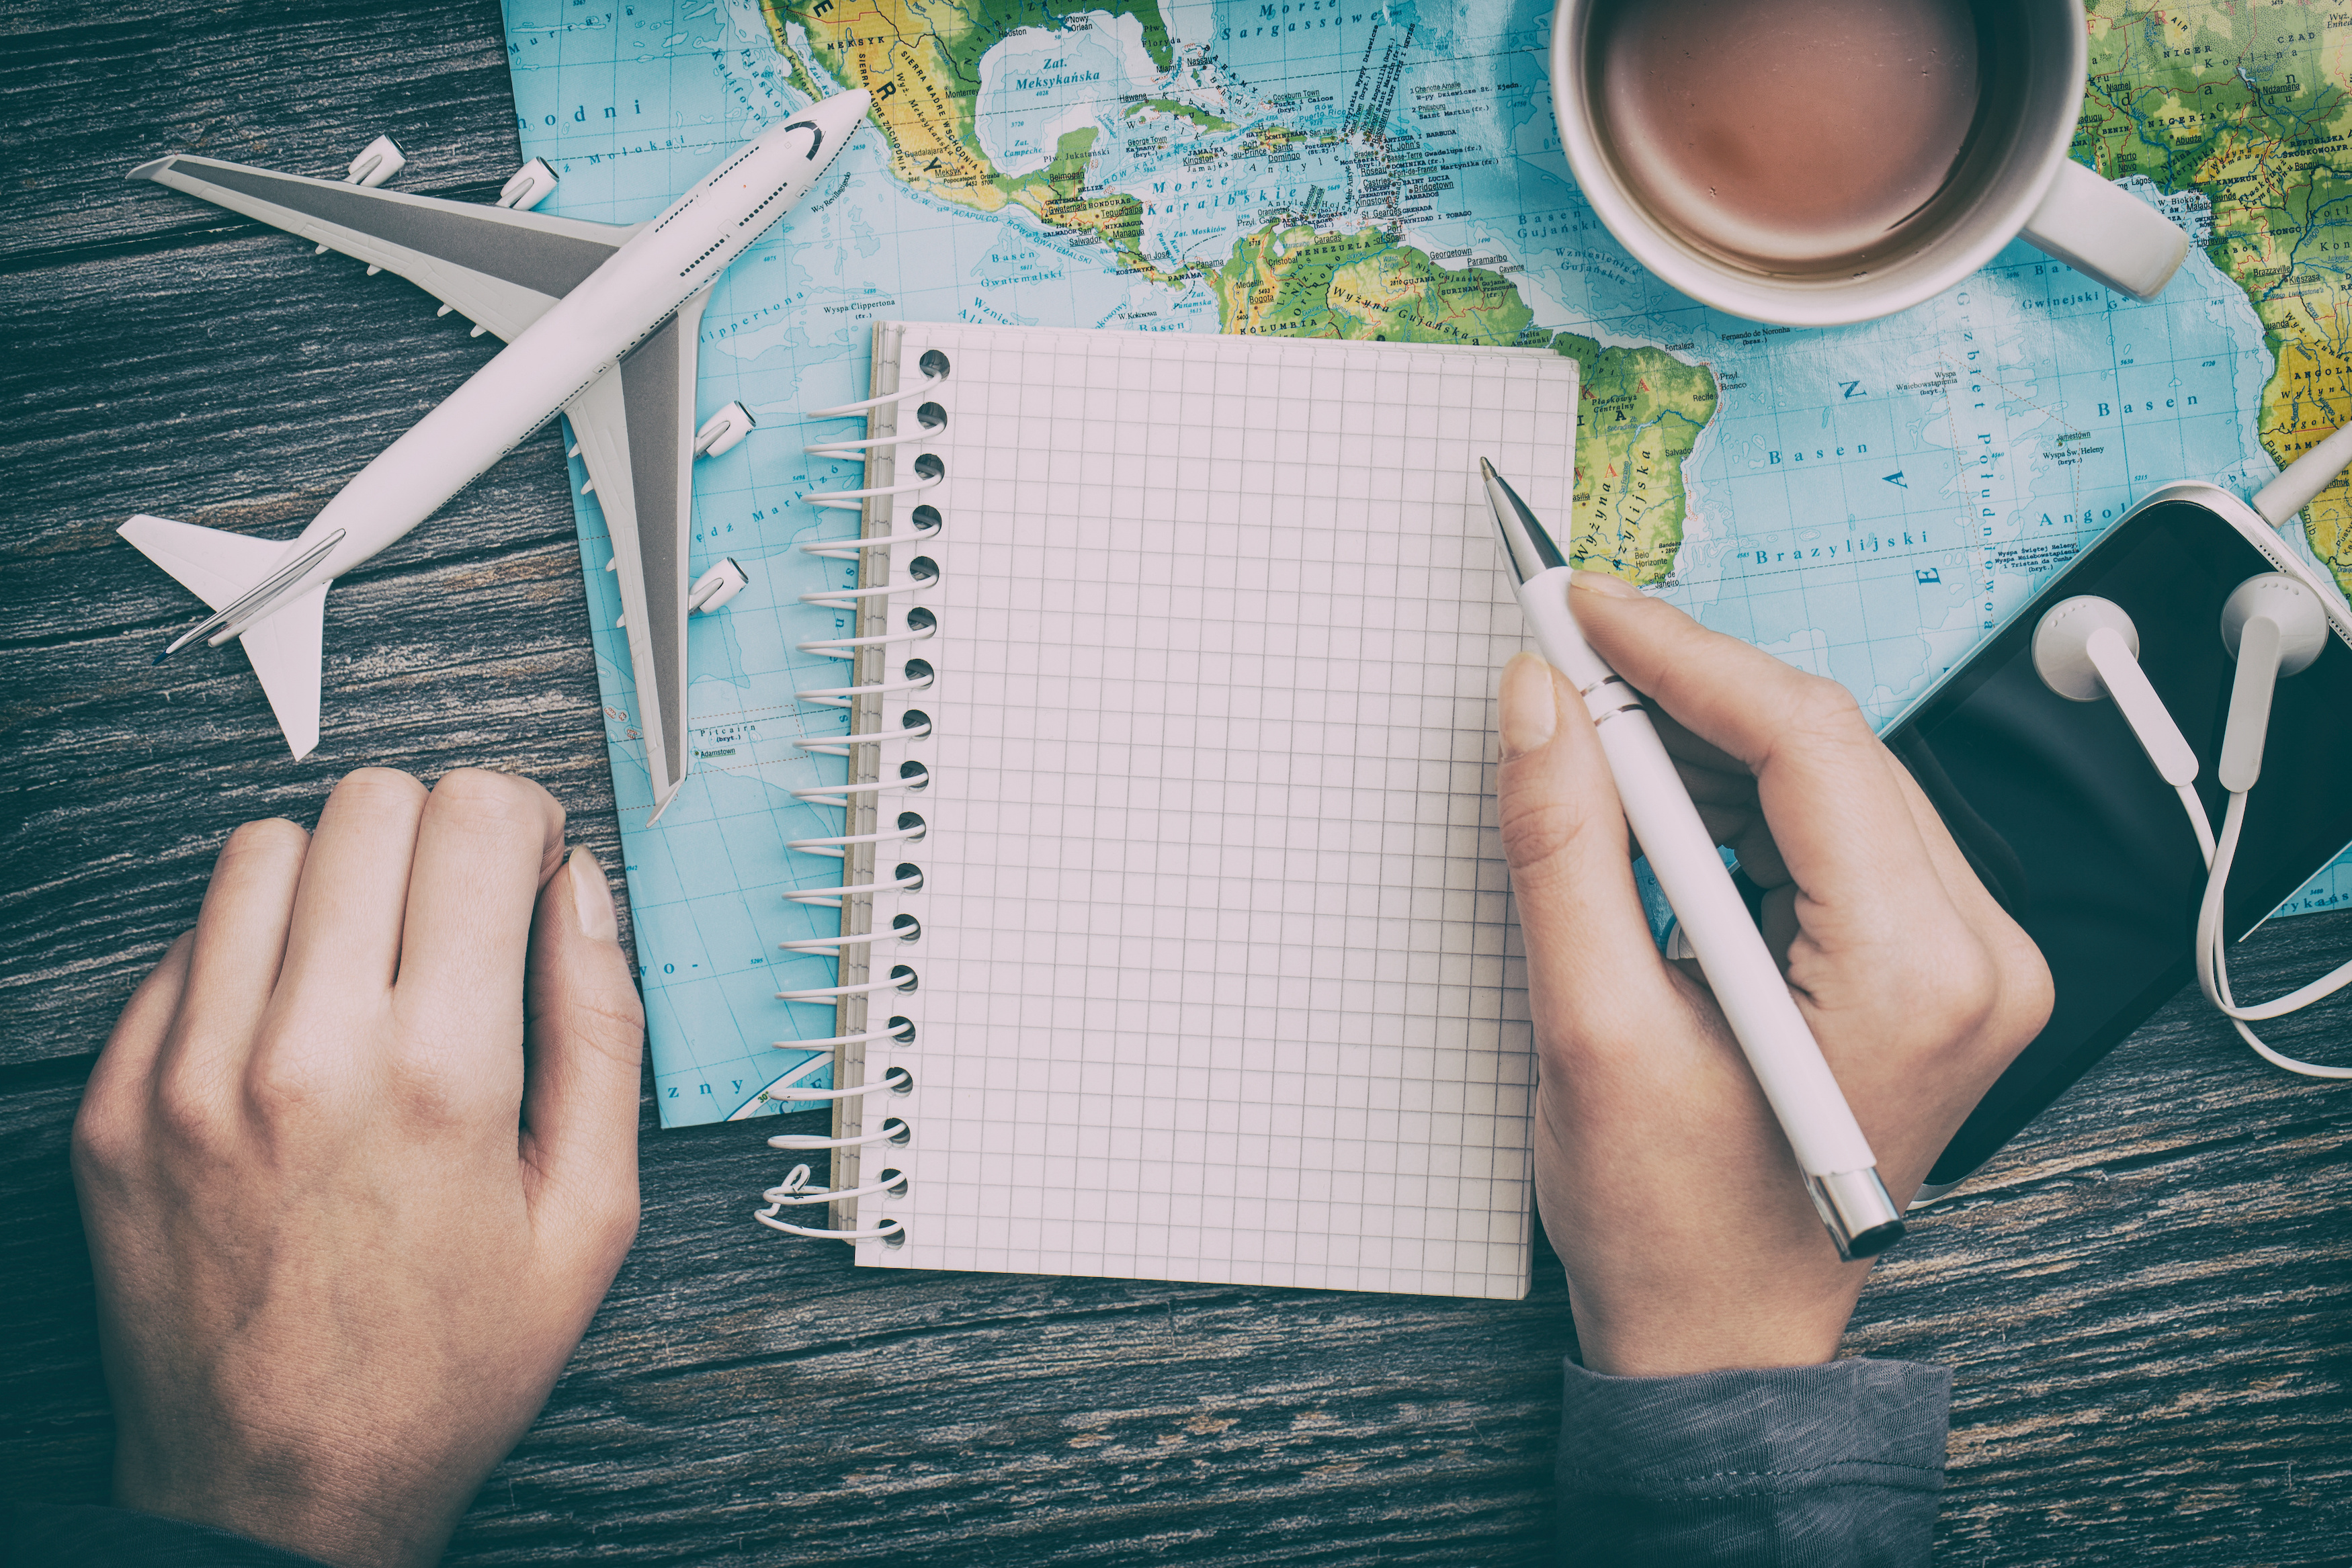 Student writing in travel journal with map, toy plane, coffee and phone